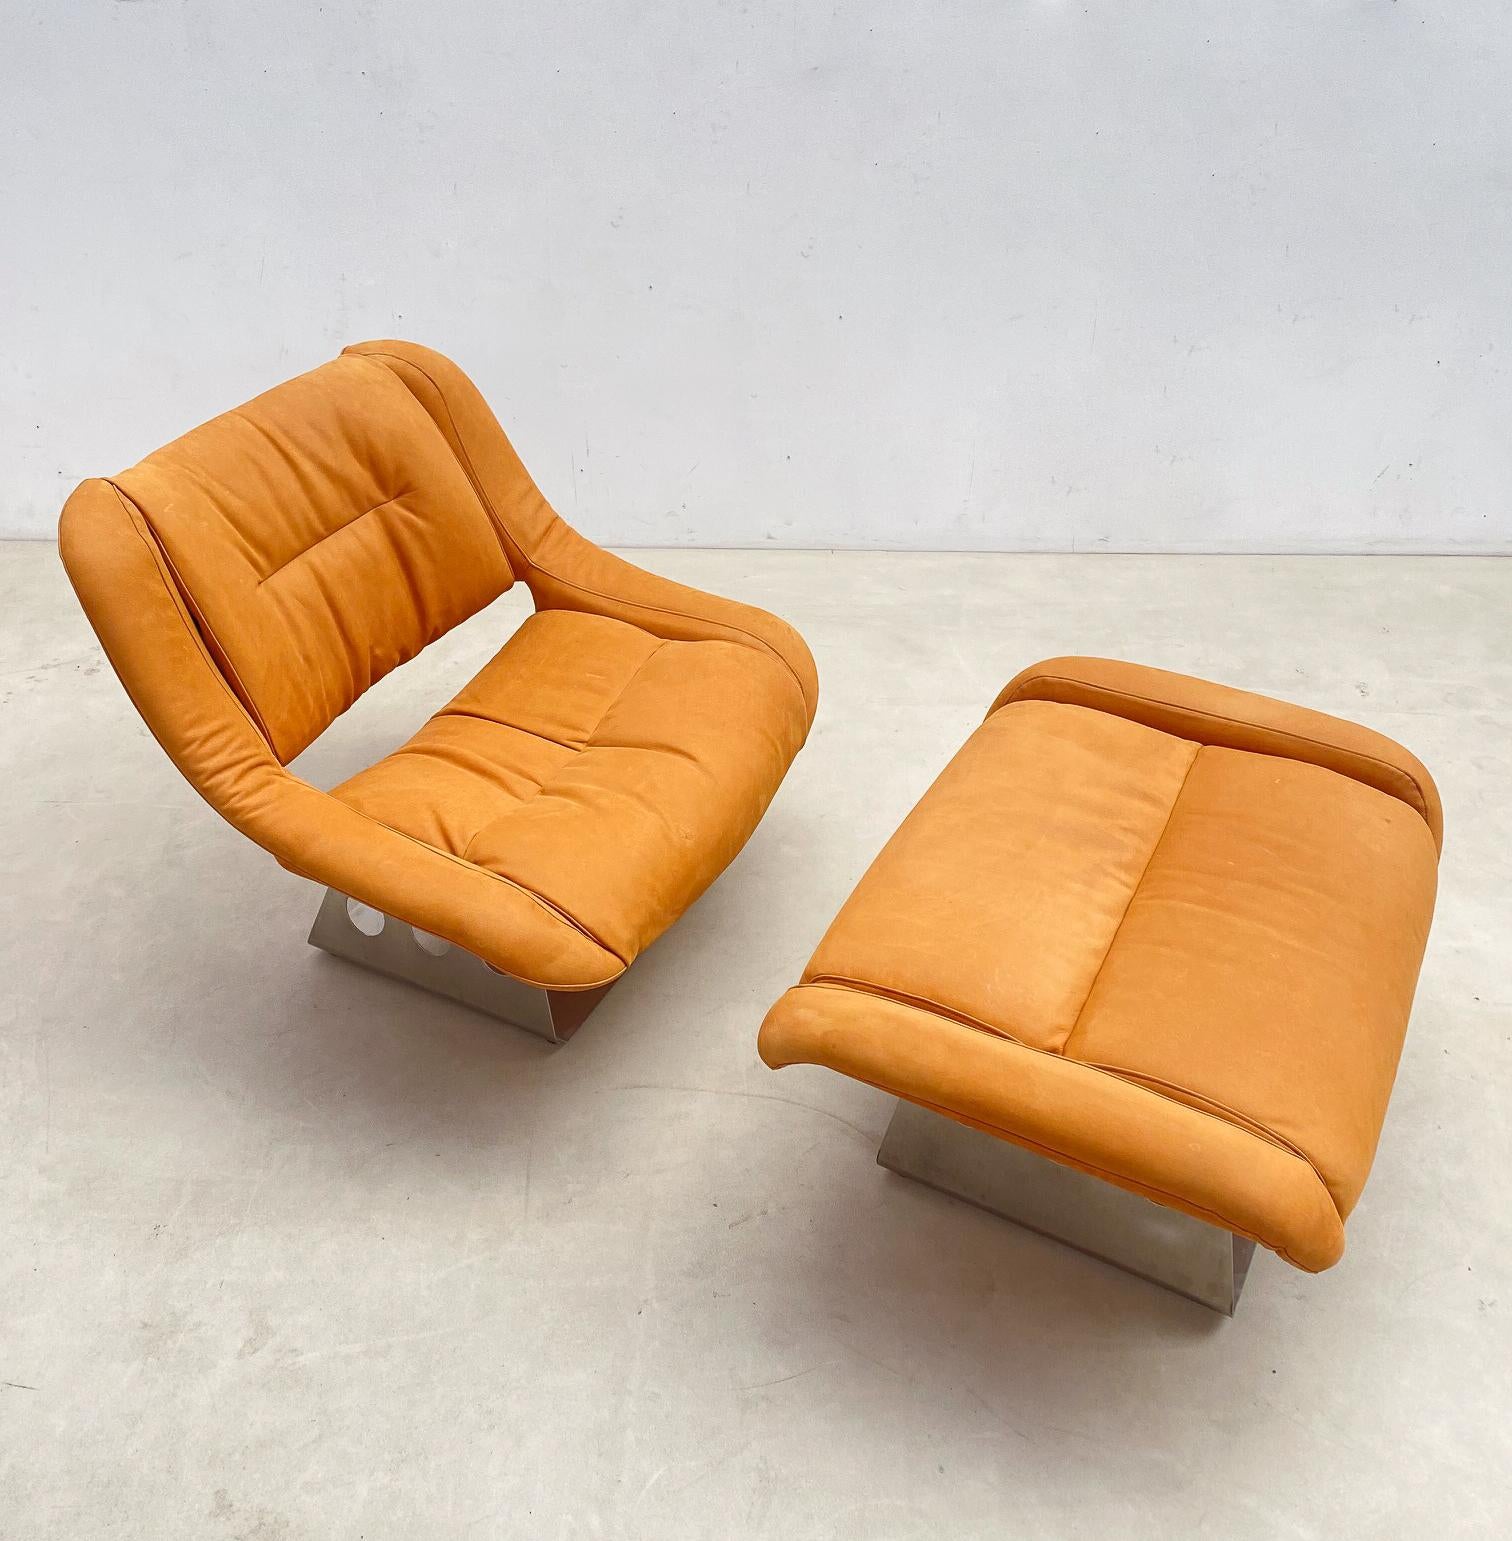 Late 20th Century Mid-Century Lounge Chair and Ottoman, Italy, 1970s - New Leather Upholstery For Sale